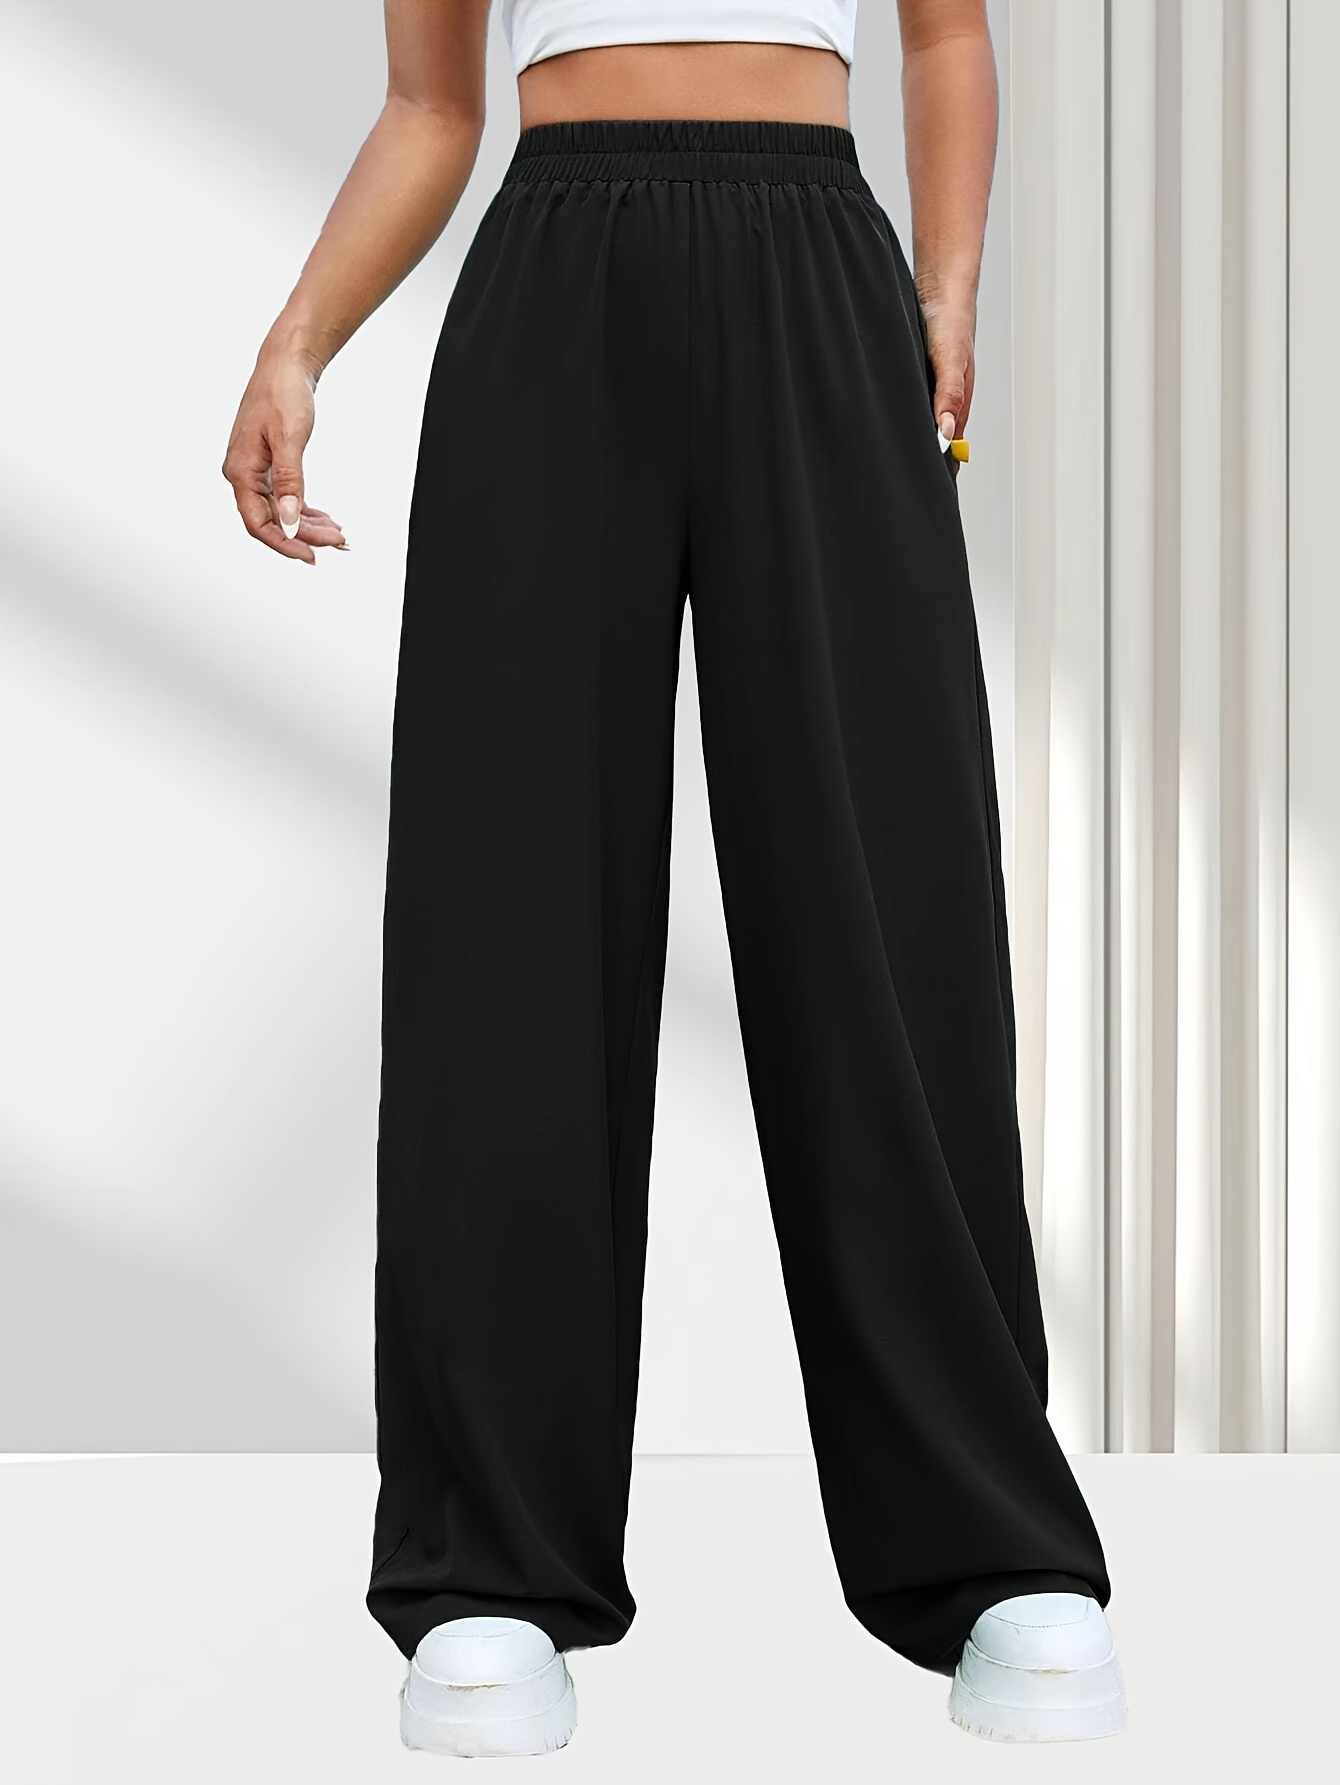 Solid Elastic Waist Loose Pants, Casual Wide Leg Pants For Spring & Summer,  Women's Clothing